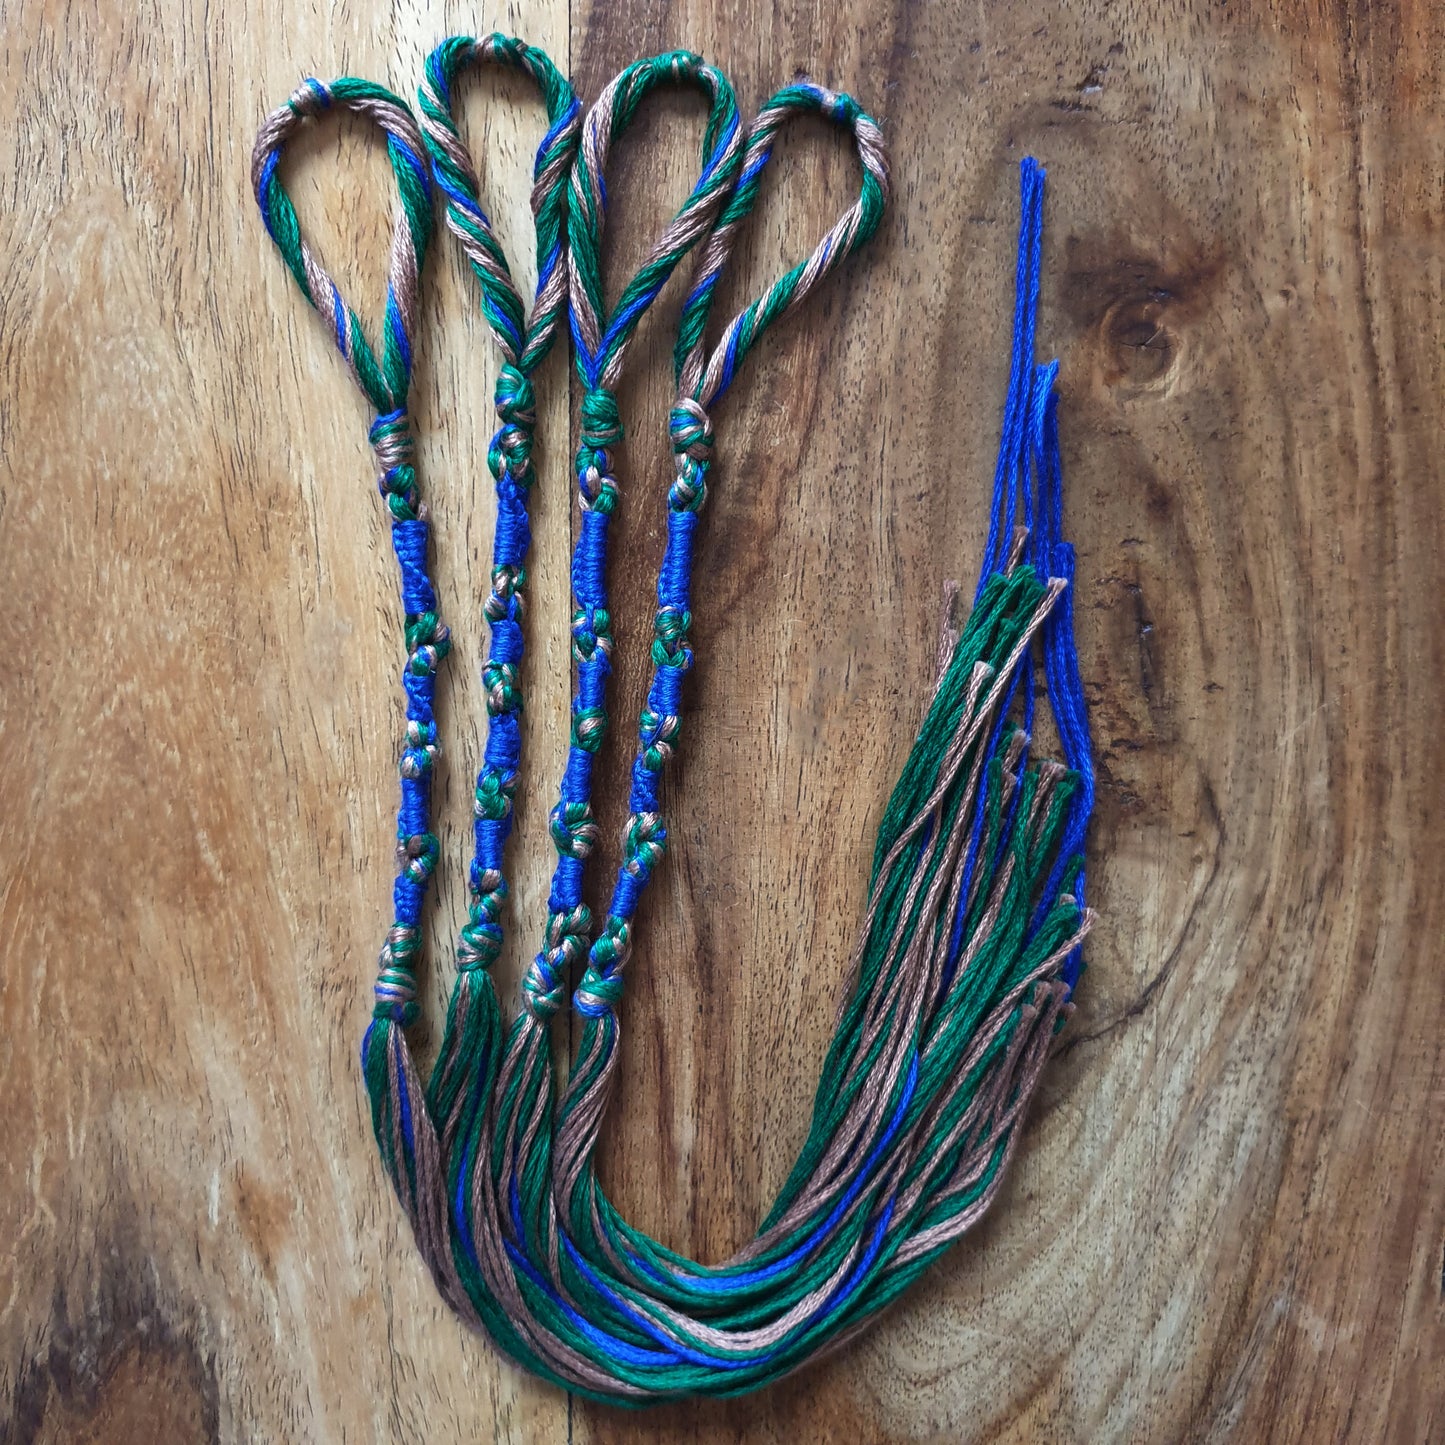 Tzitzit set of 4 - Green, Brown & Blue, Knotted YHWH (10-5-6-5), Traditional Tassels, Torah Fringe